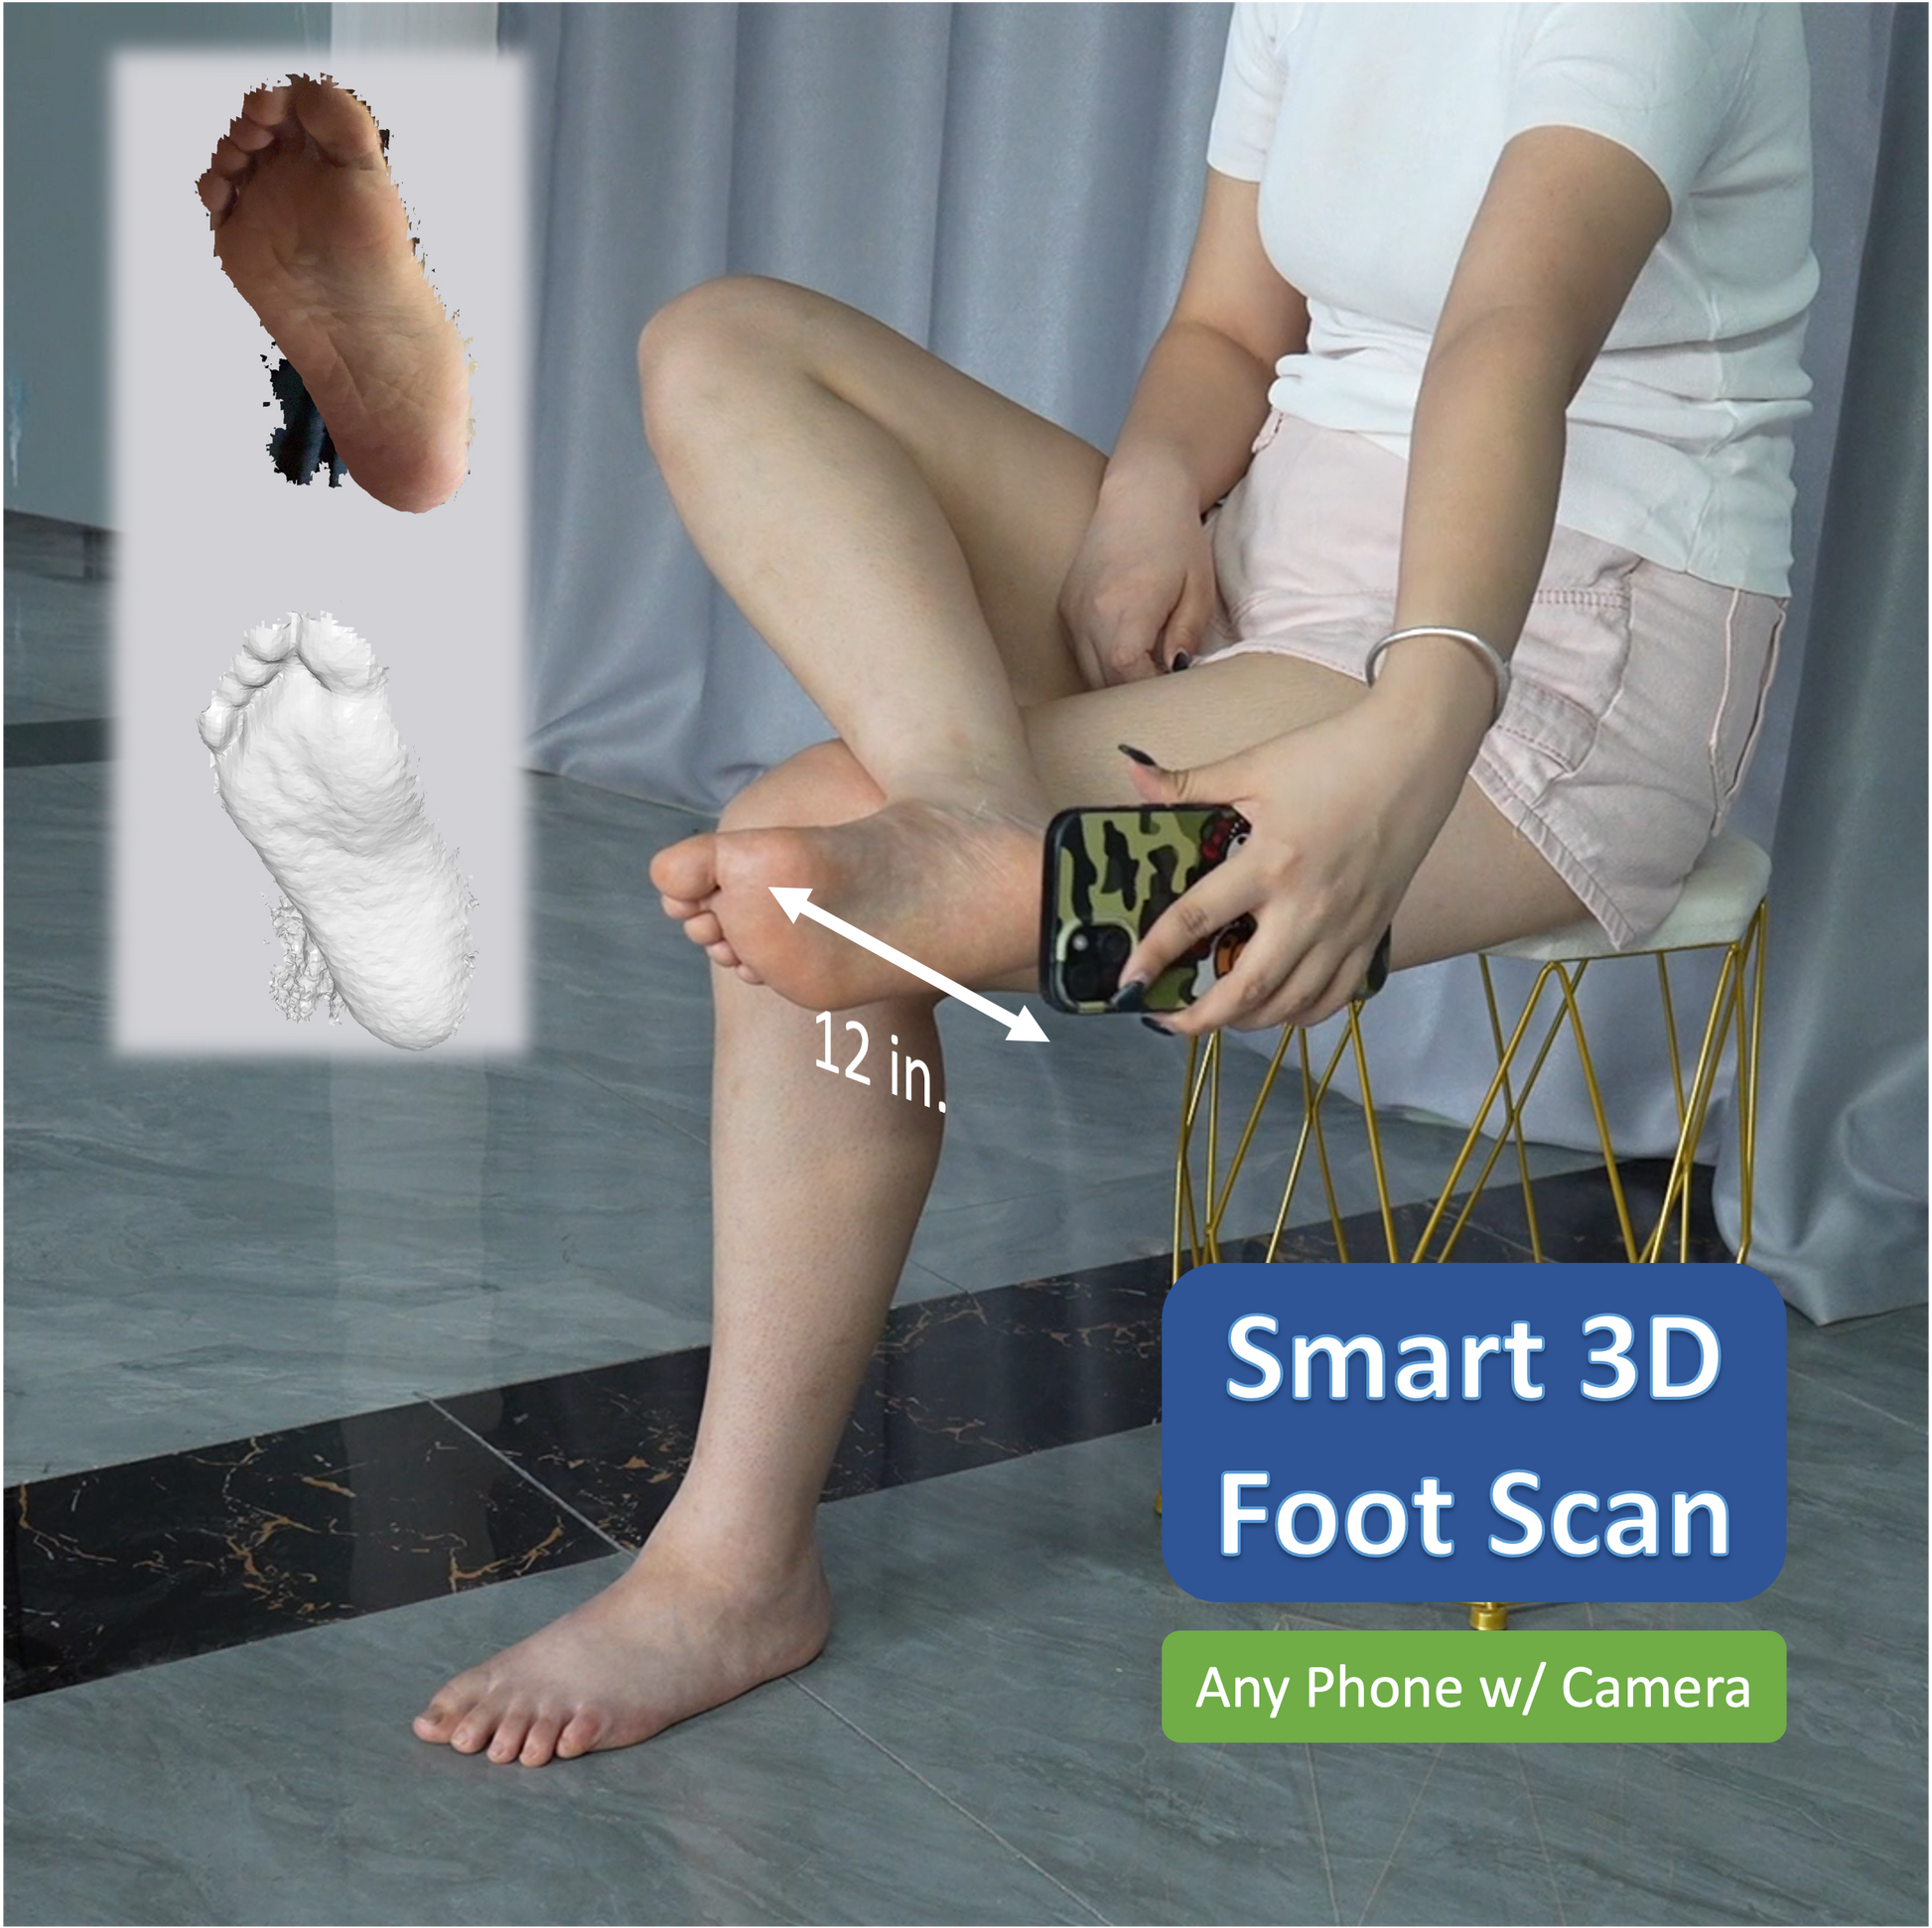 SprinSole custom orthotics 3D foot scanning with your phone at home